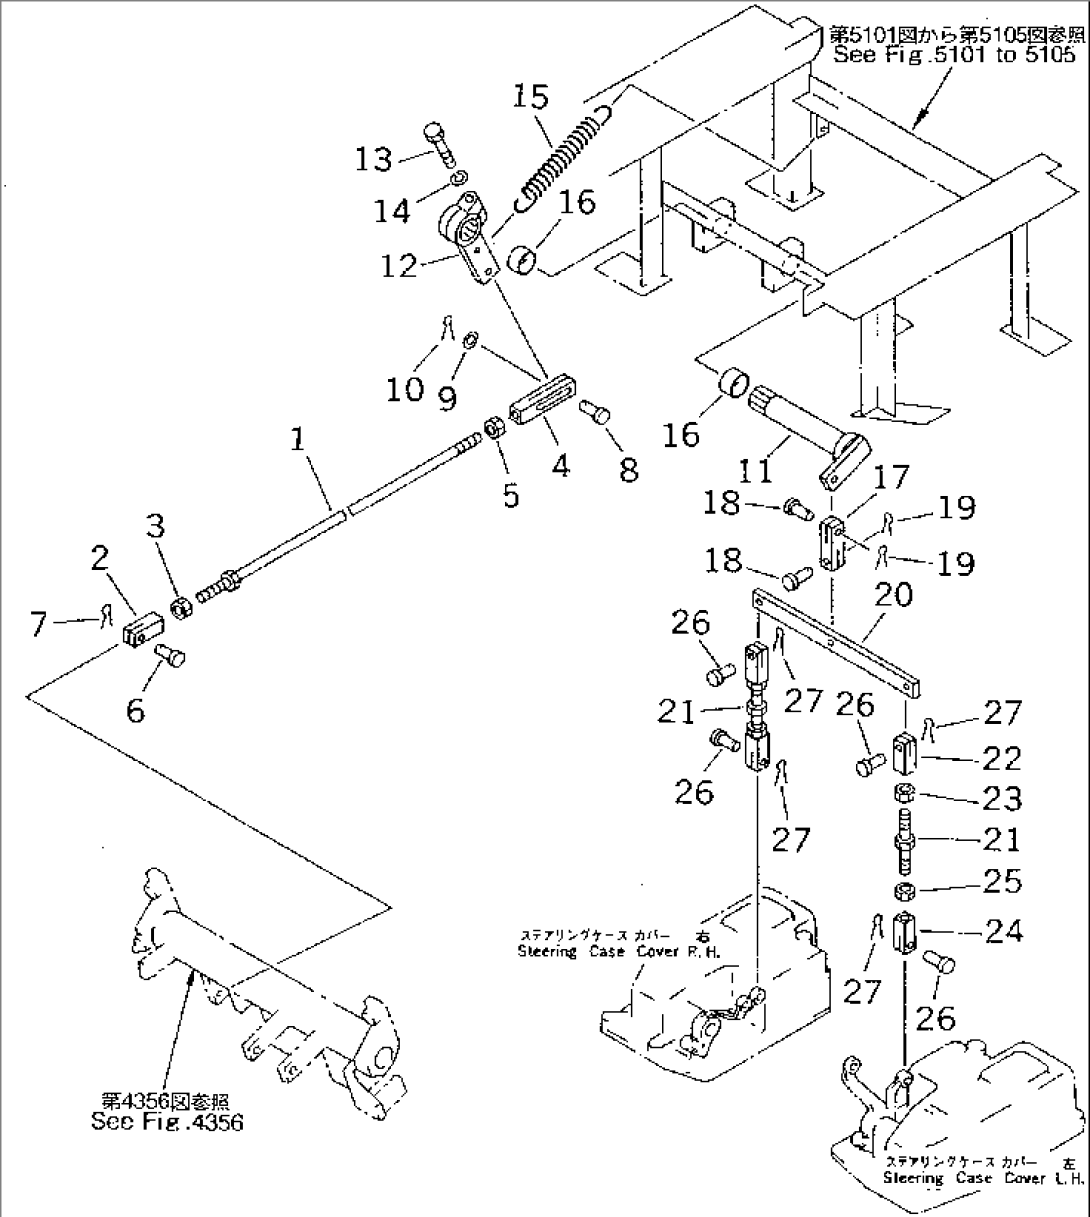 BRAKE PEDAL LINKAGE (FOR TWO LEVERS STEERING)